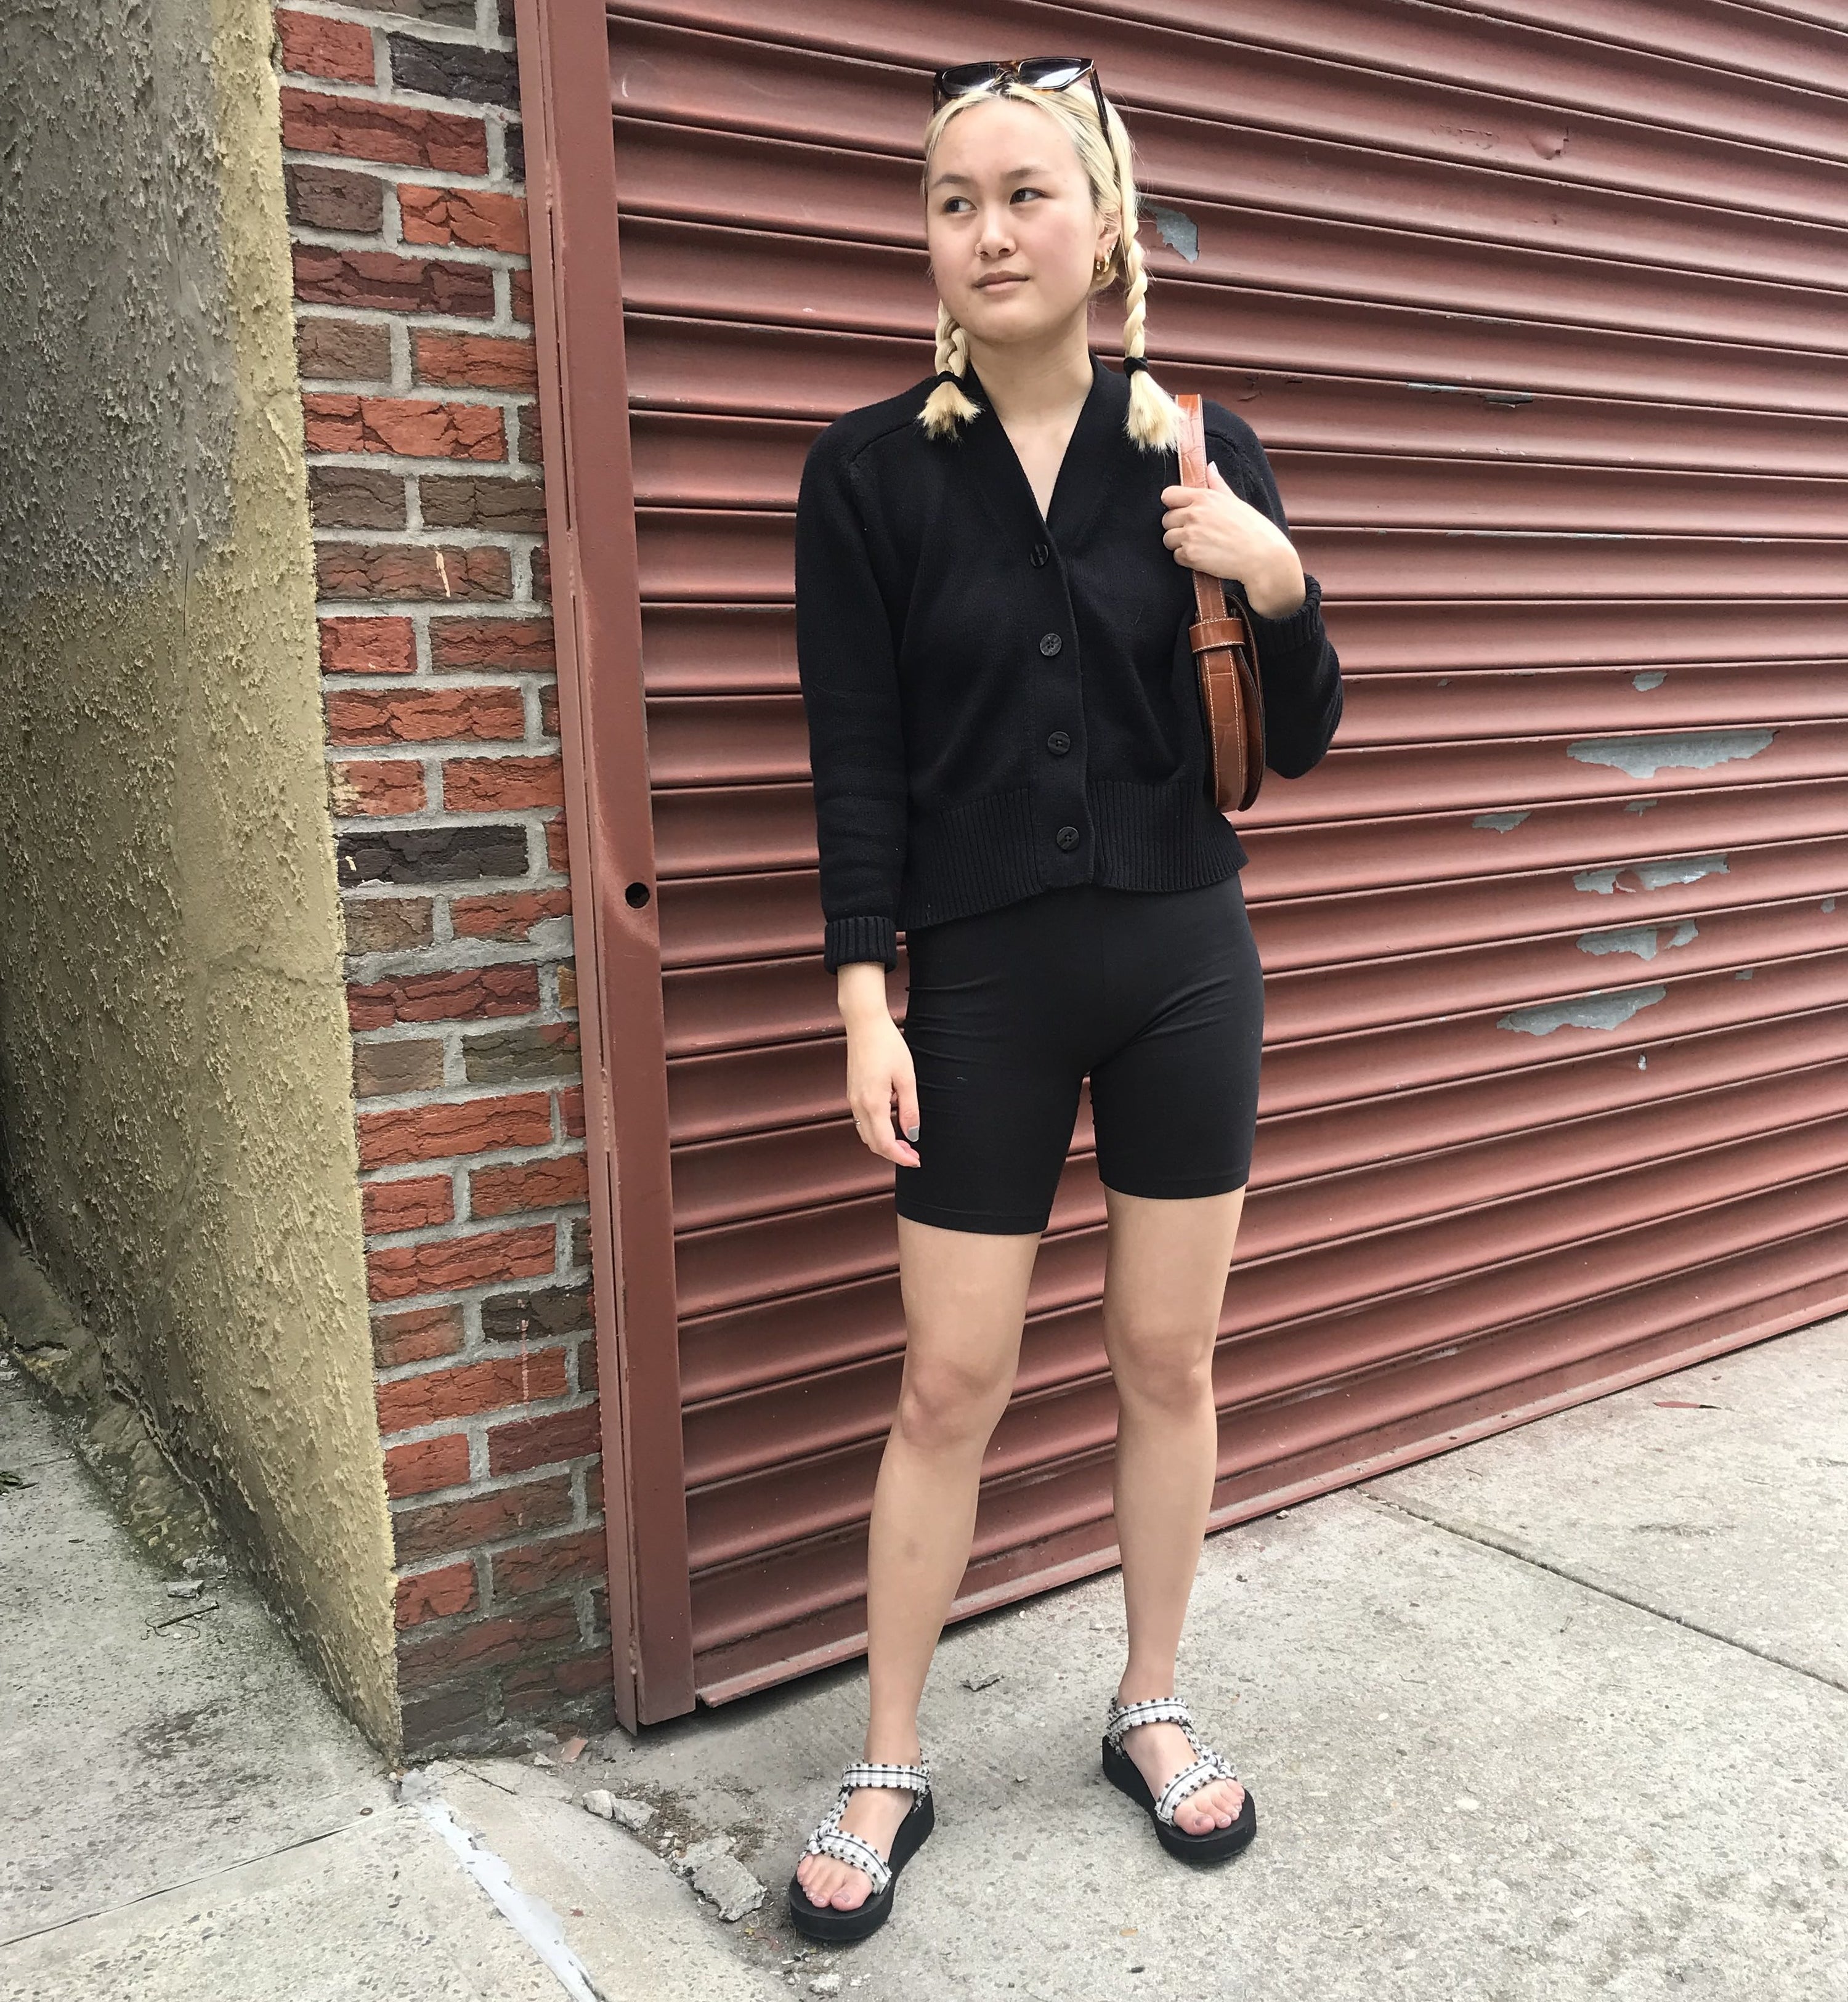 BuzzFeed Editor wearing the sandals with black bike shorts and a black cardigan